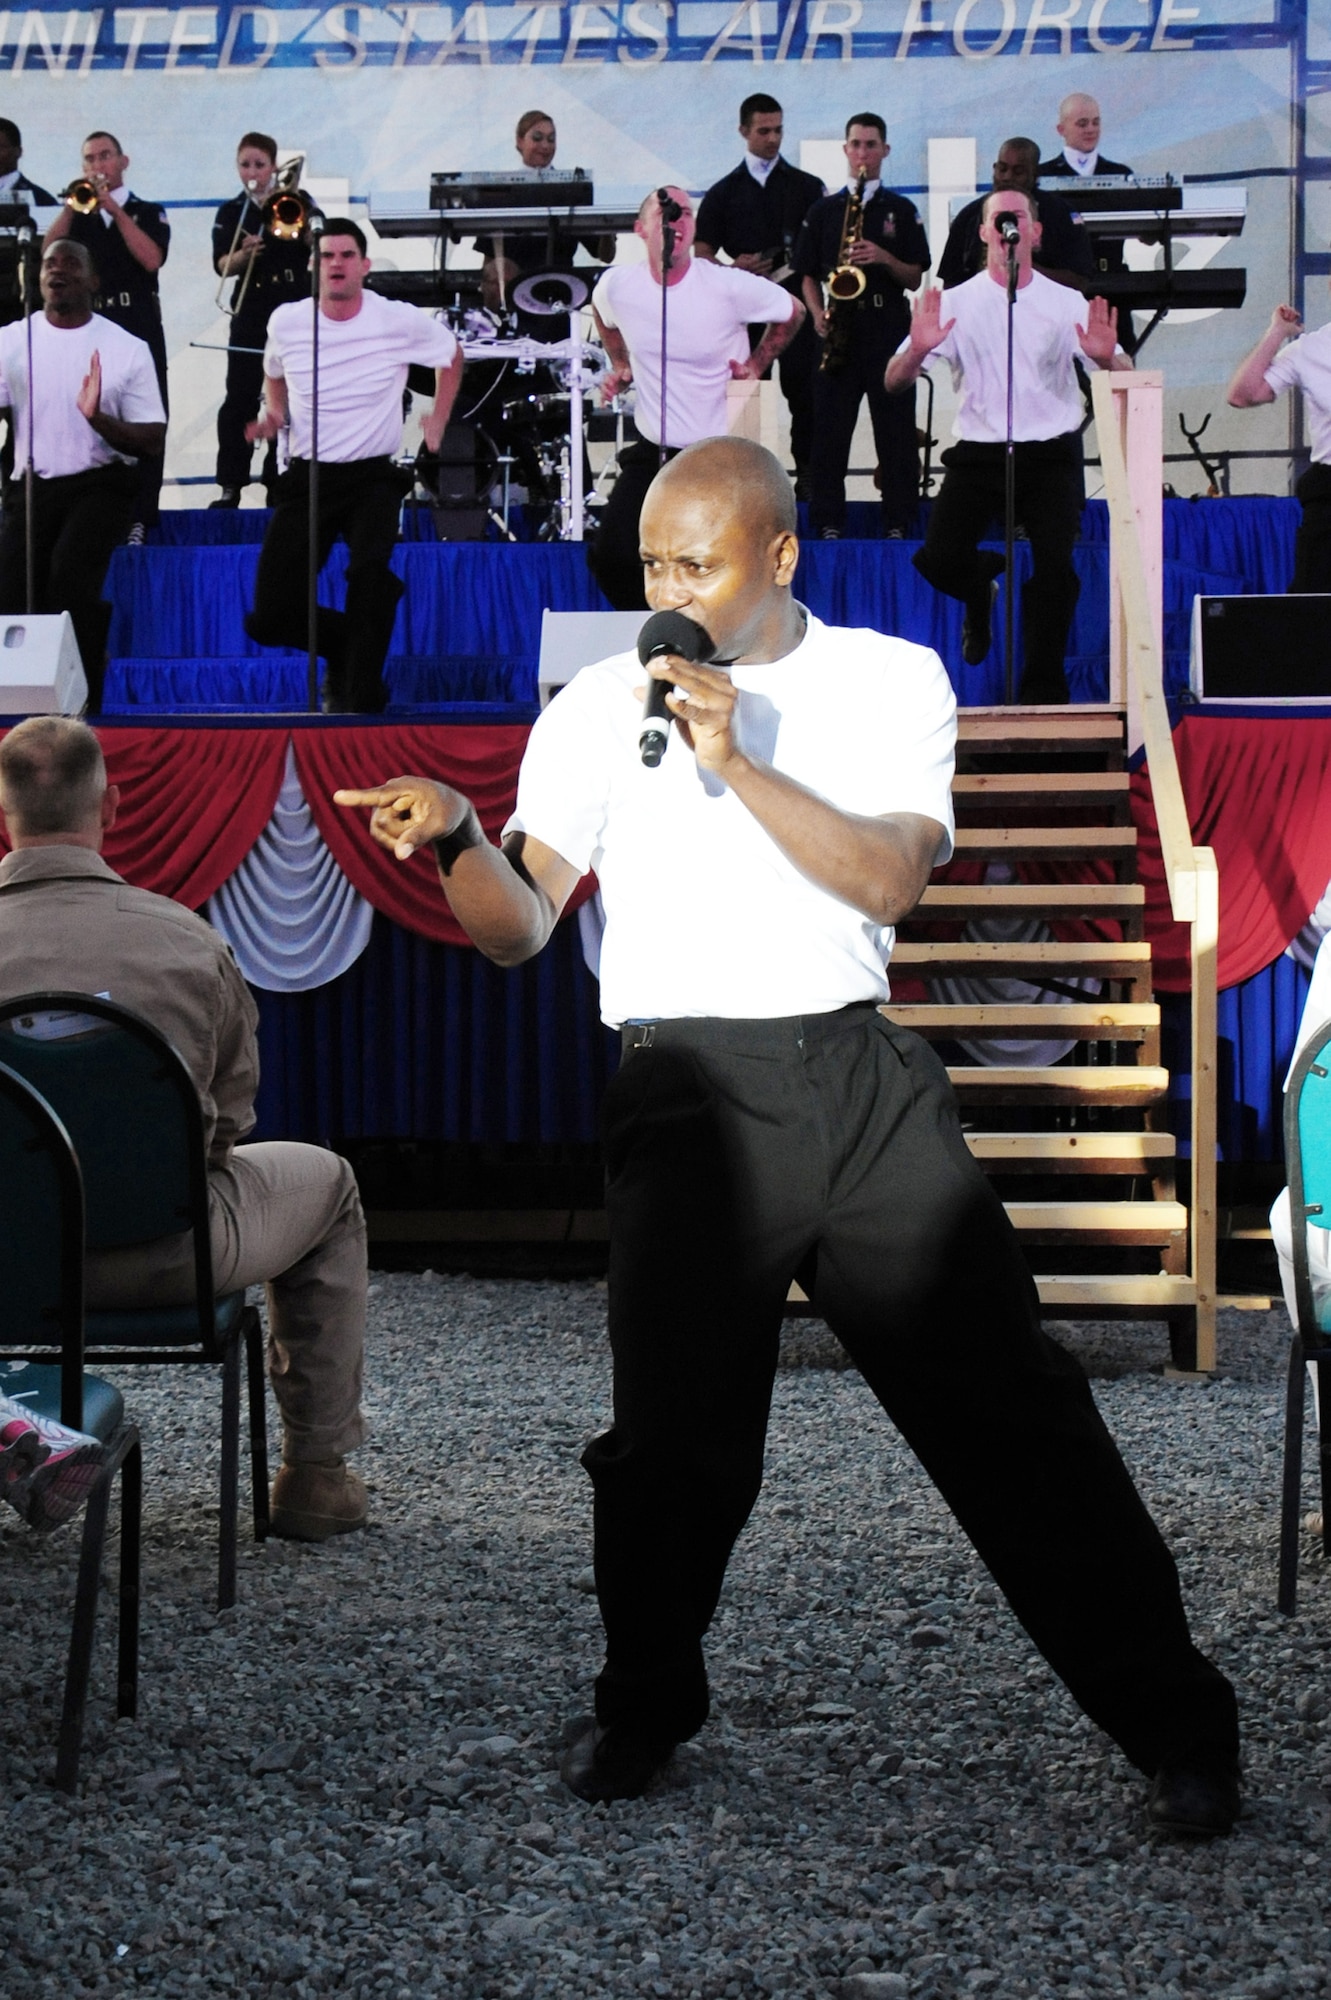 Tech. Sgt. Octavious Hill sings to the crowd during a performance July 9 at Manas Air Base, Kyrgyzstan. Sergeant Hill is a 99th Civil Engineer Squadron ventilation and refrigeration craftsman stationed at Nellis Air Force Base, Nev., and hails from Opelika, Ala. (U.S. Air Force photo/Senior Airman Steele Britton) 